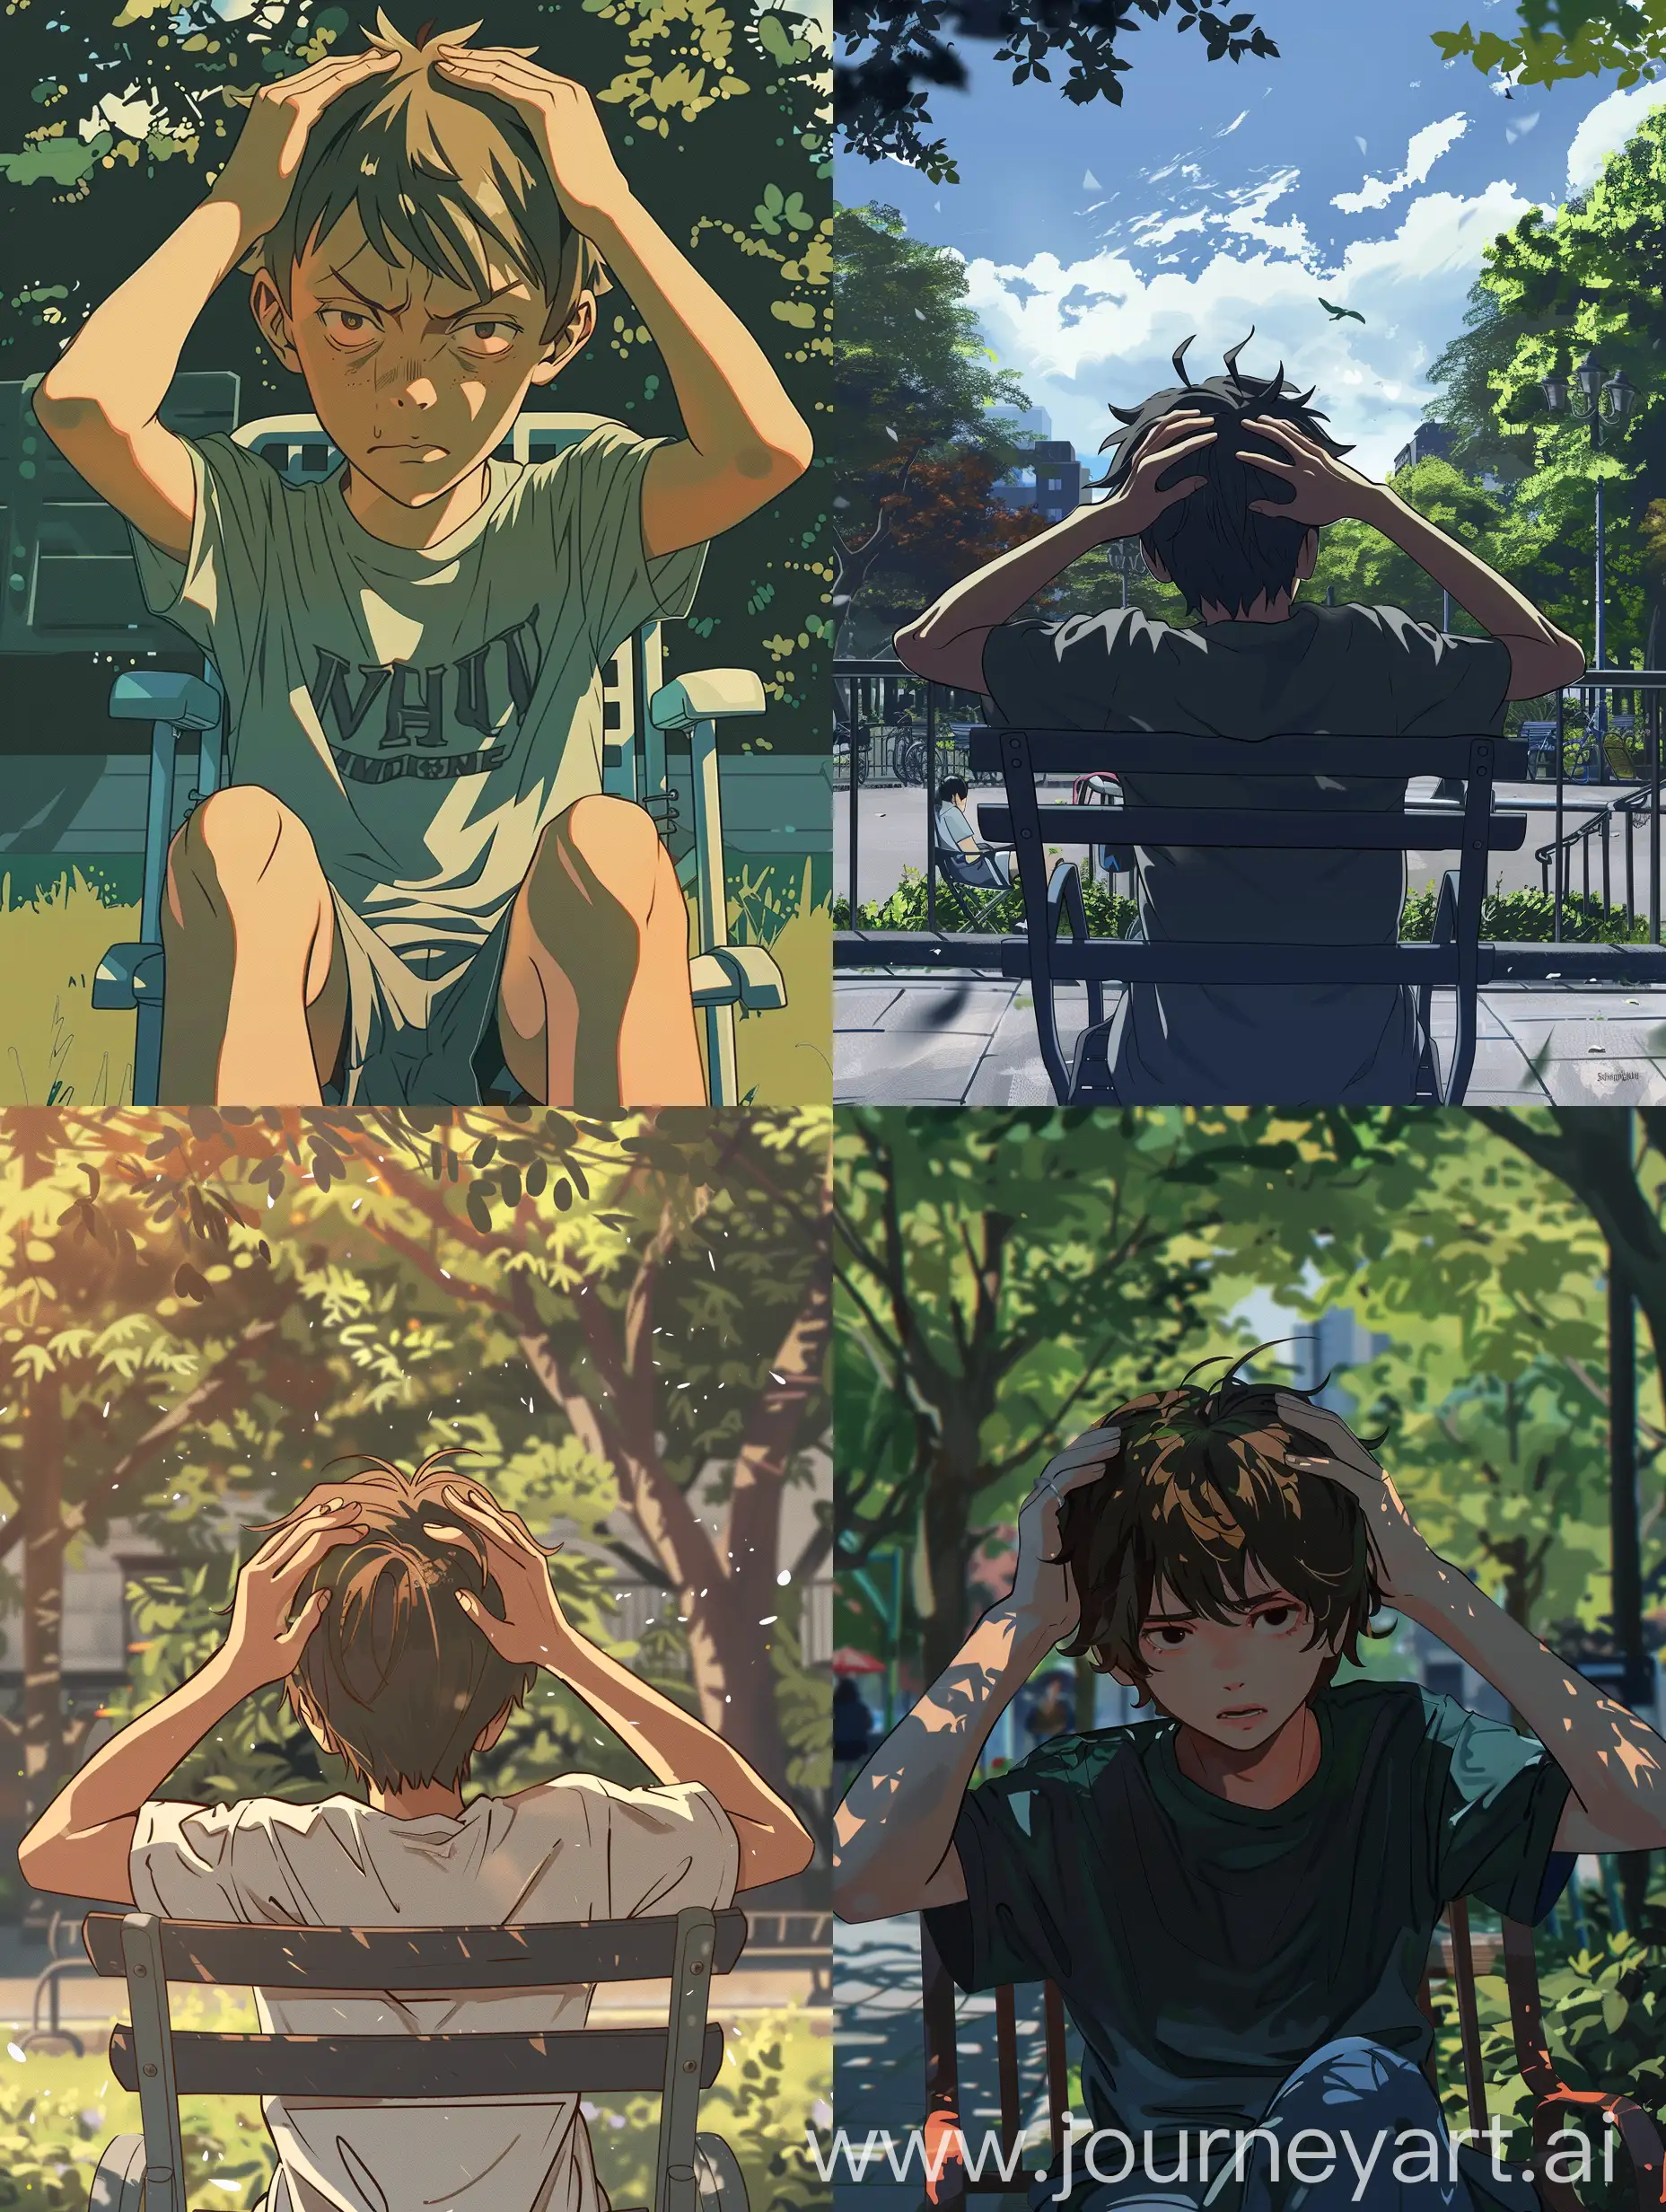 Anime style,A View from little far, a 15 year old teenage boy sitting on a park chair with hands on his back of head with a bored expression,avoid bad and distorted view of his face.